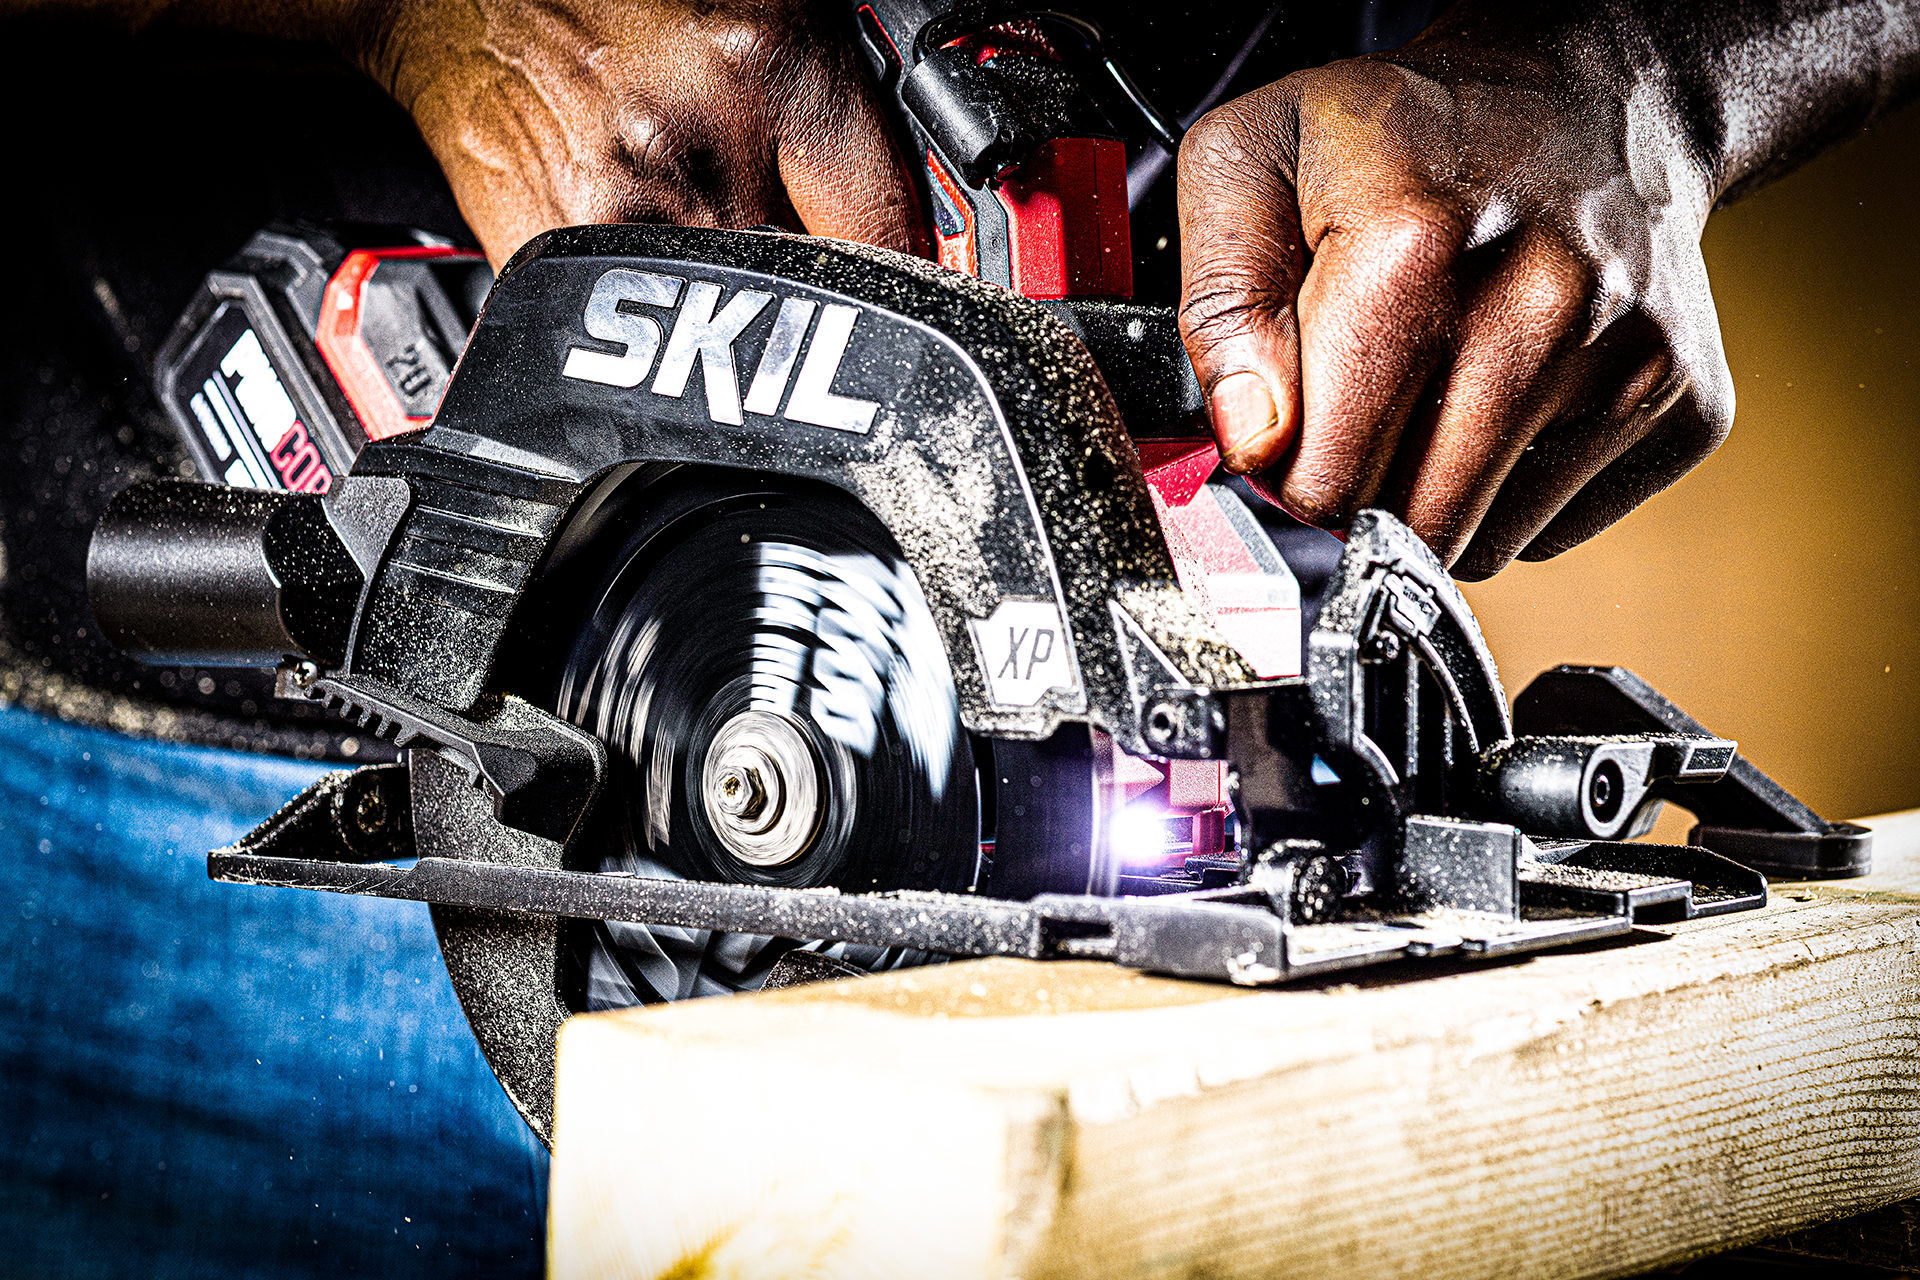 macro product photography shot on location for skil power tools